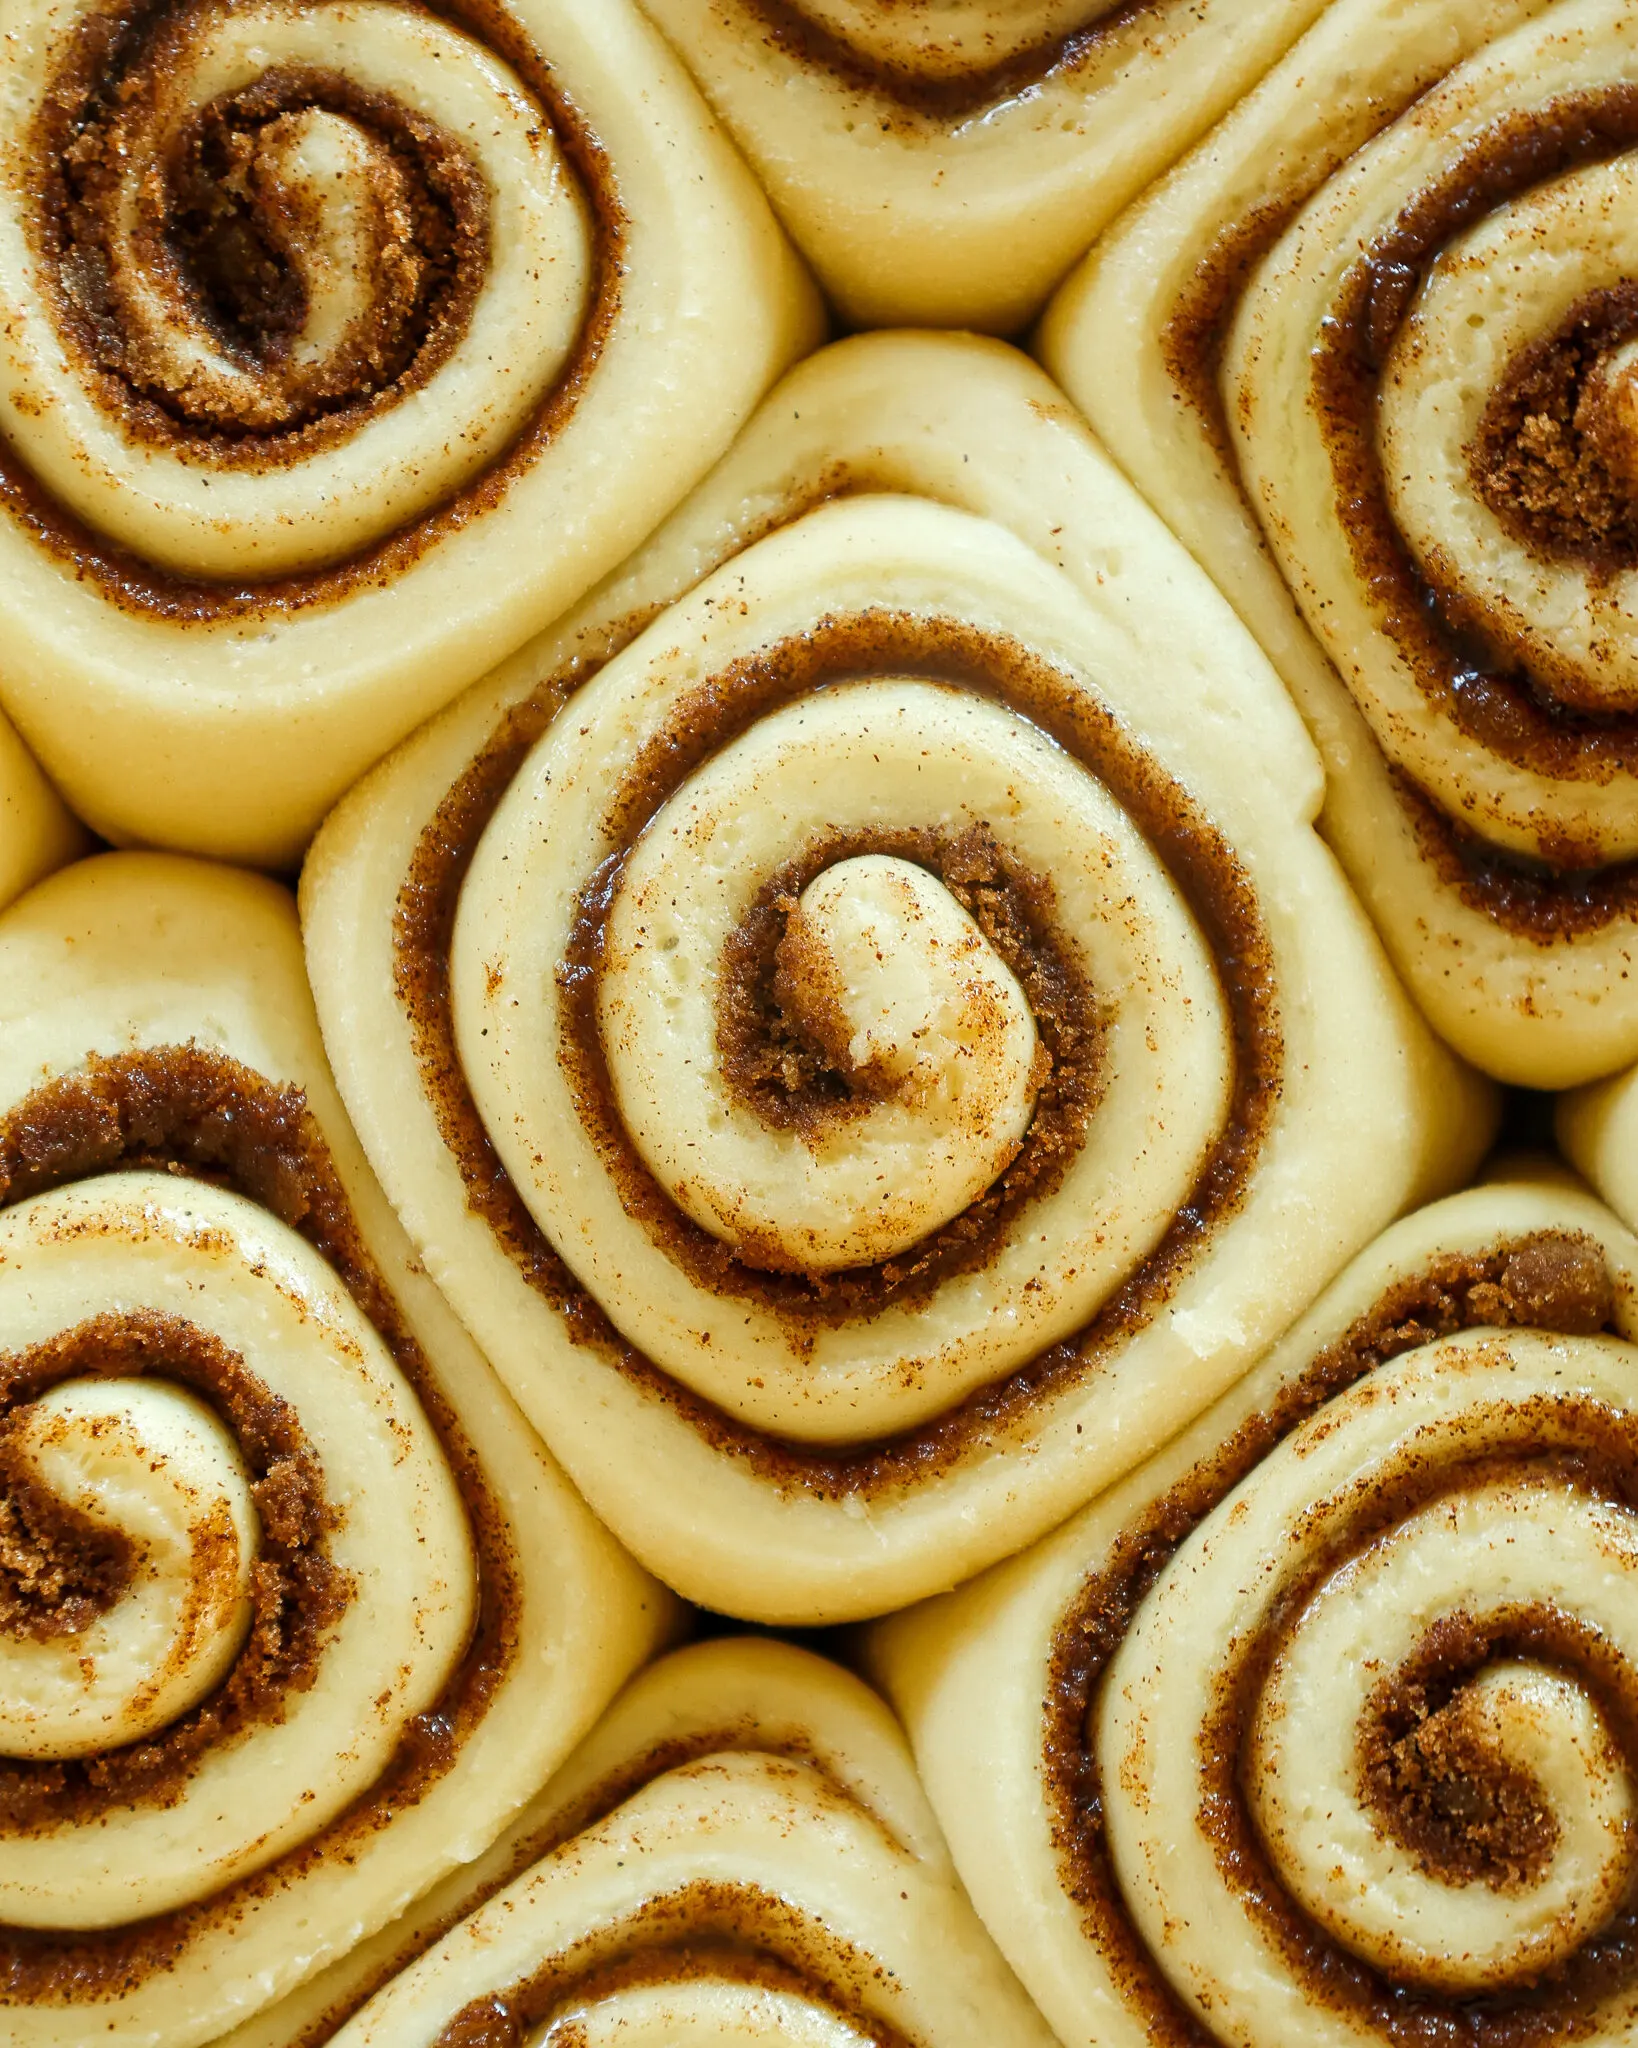 image of quick yeast cinnamon rolls that have risen and are ready to be baked